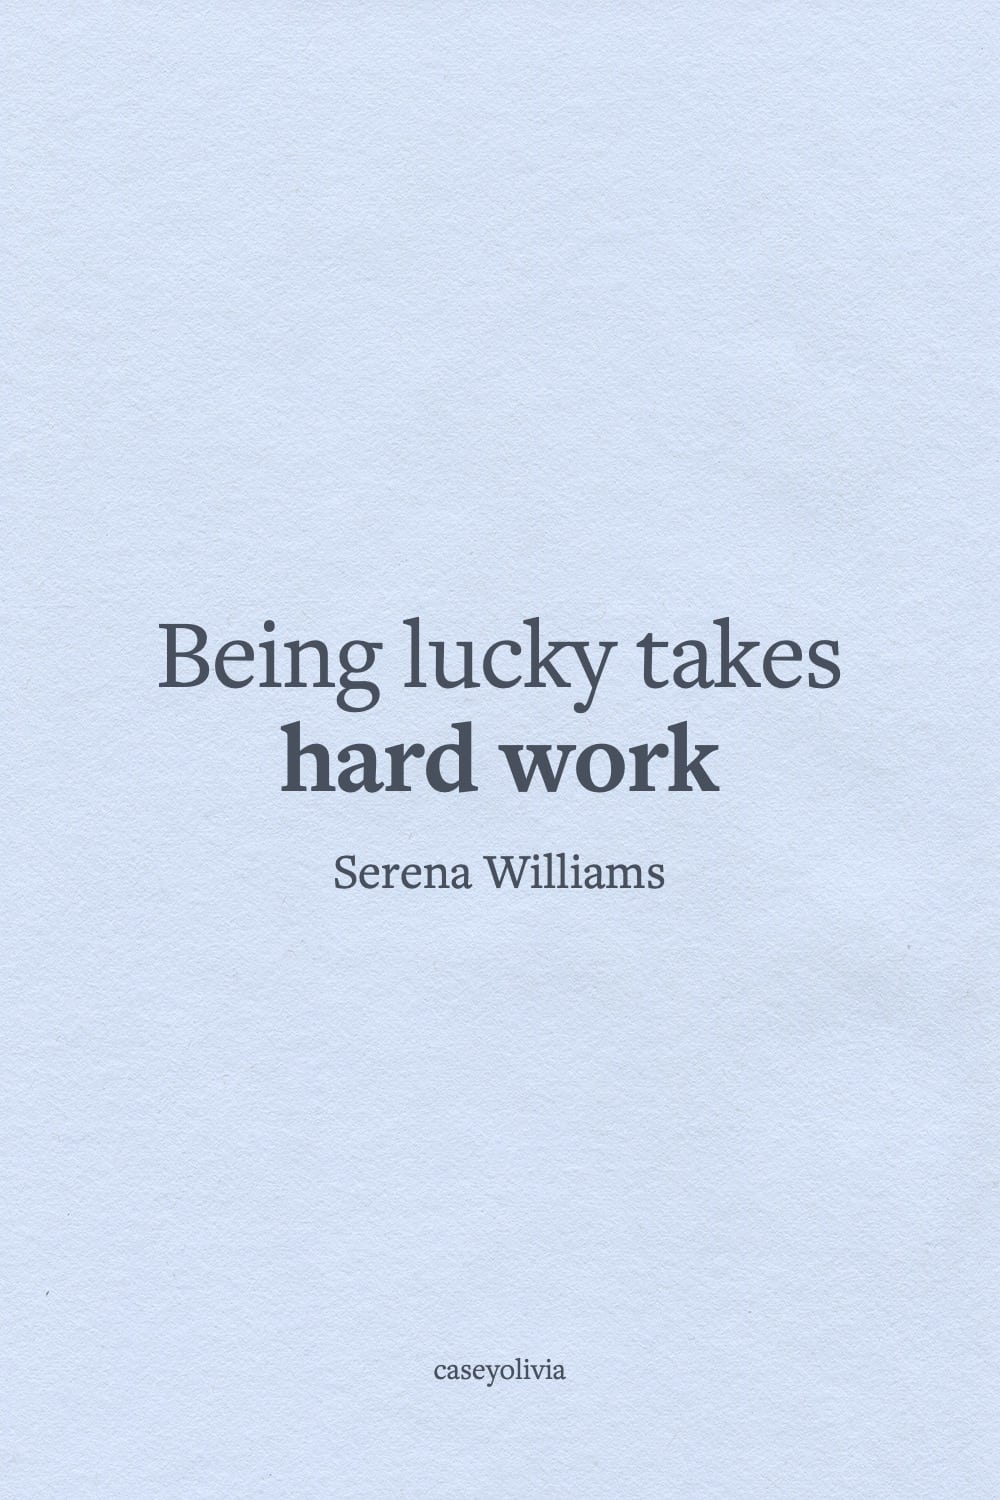 hard work serena williams quote about not being lucky